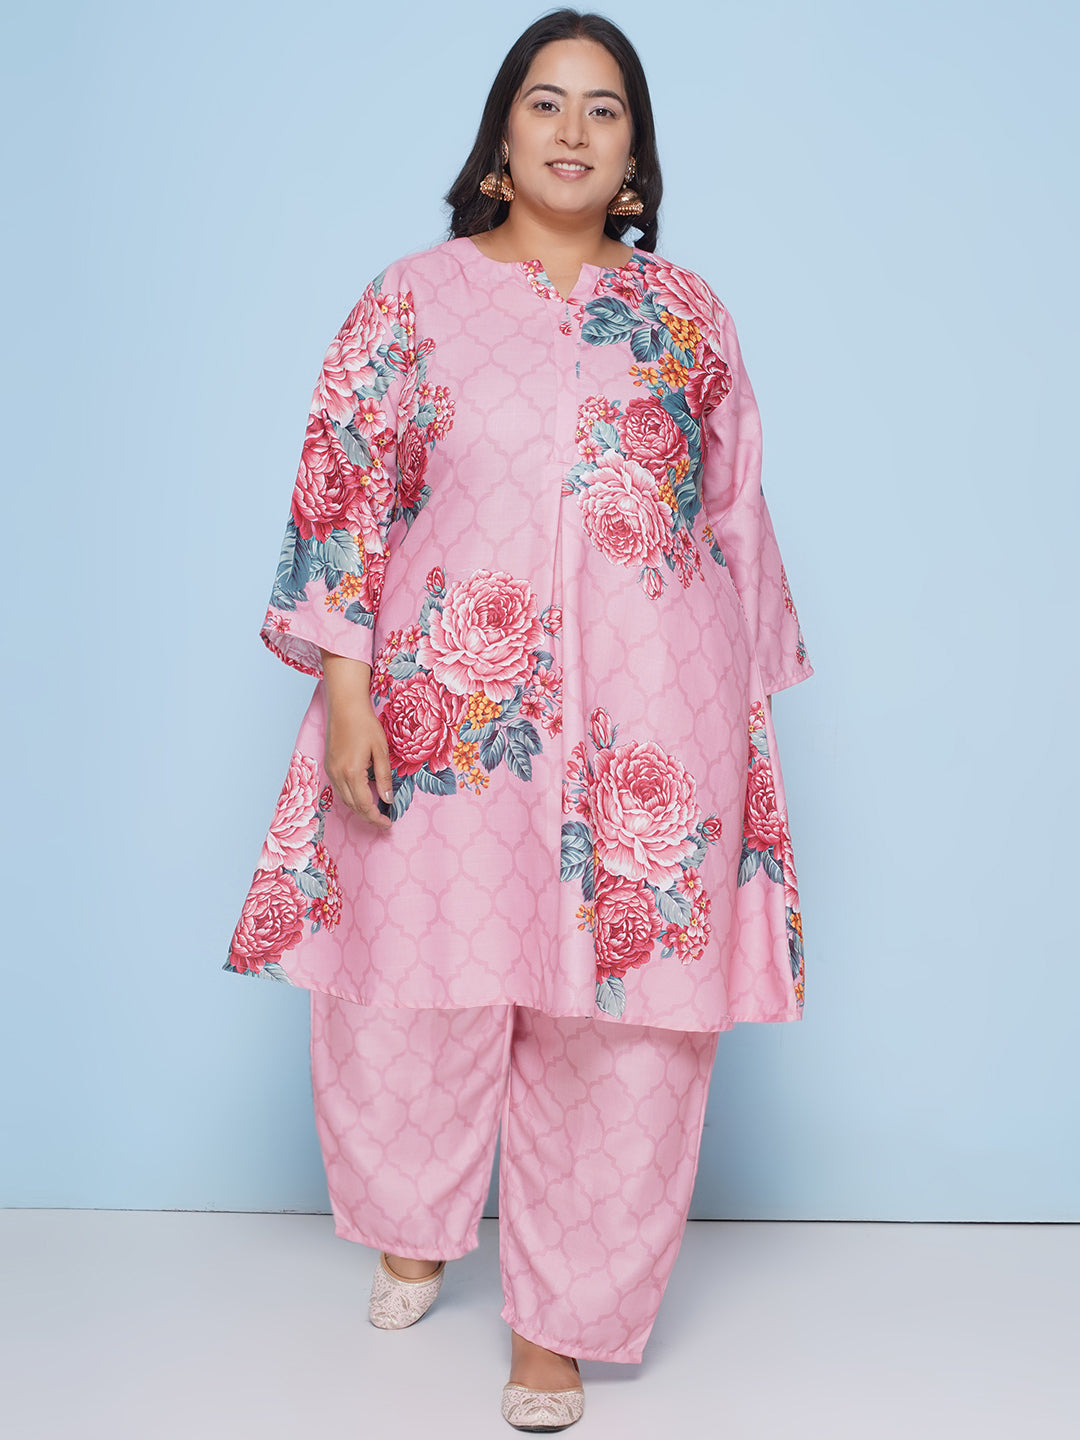 Peach color kurta with lace detailing on sleeves and neck